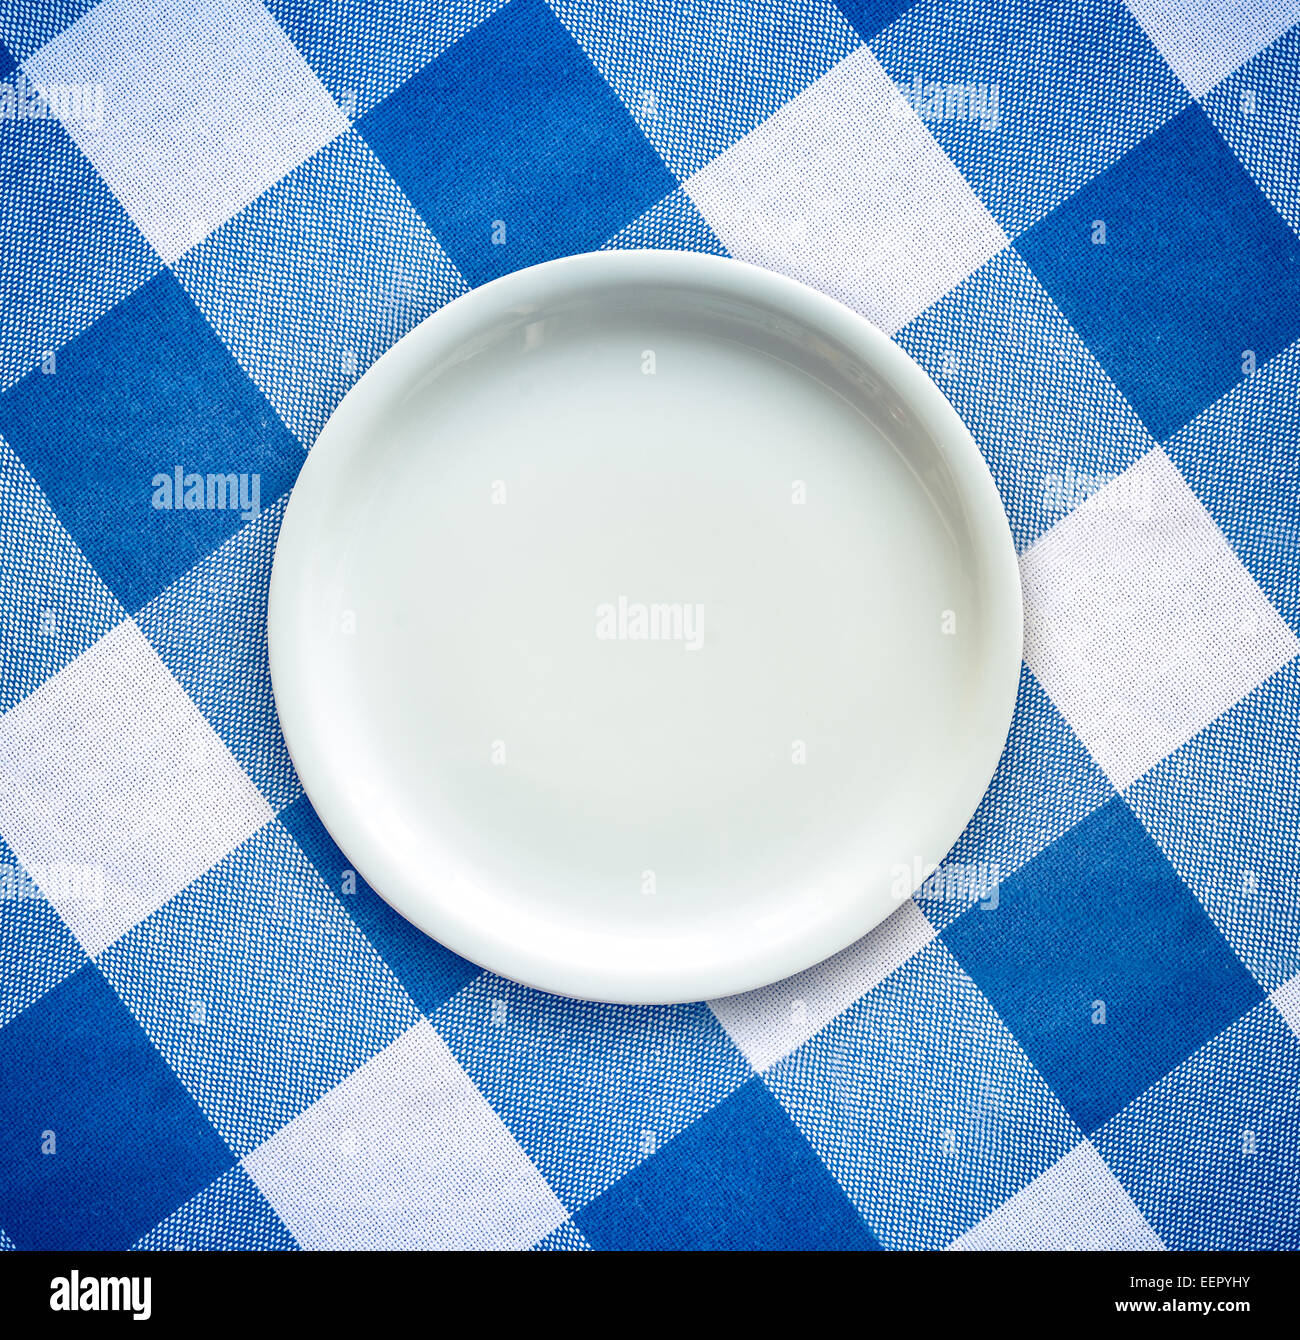 Empty White Plate On A Checked Table Cloth Stock Photo